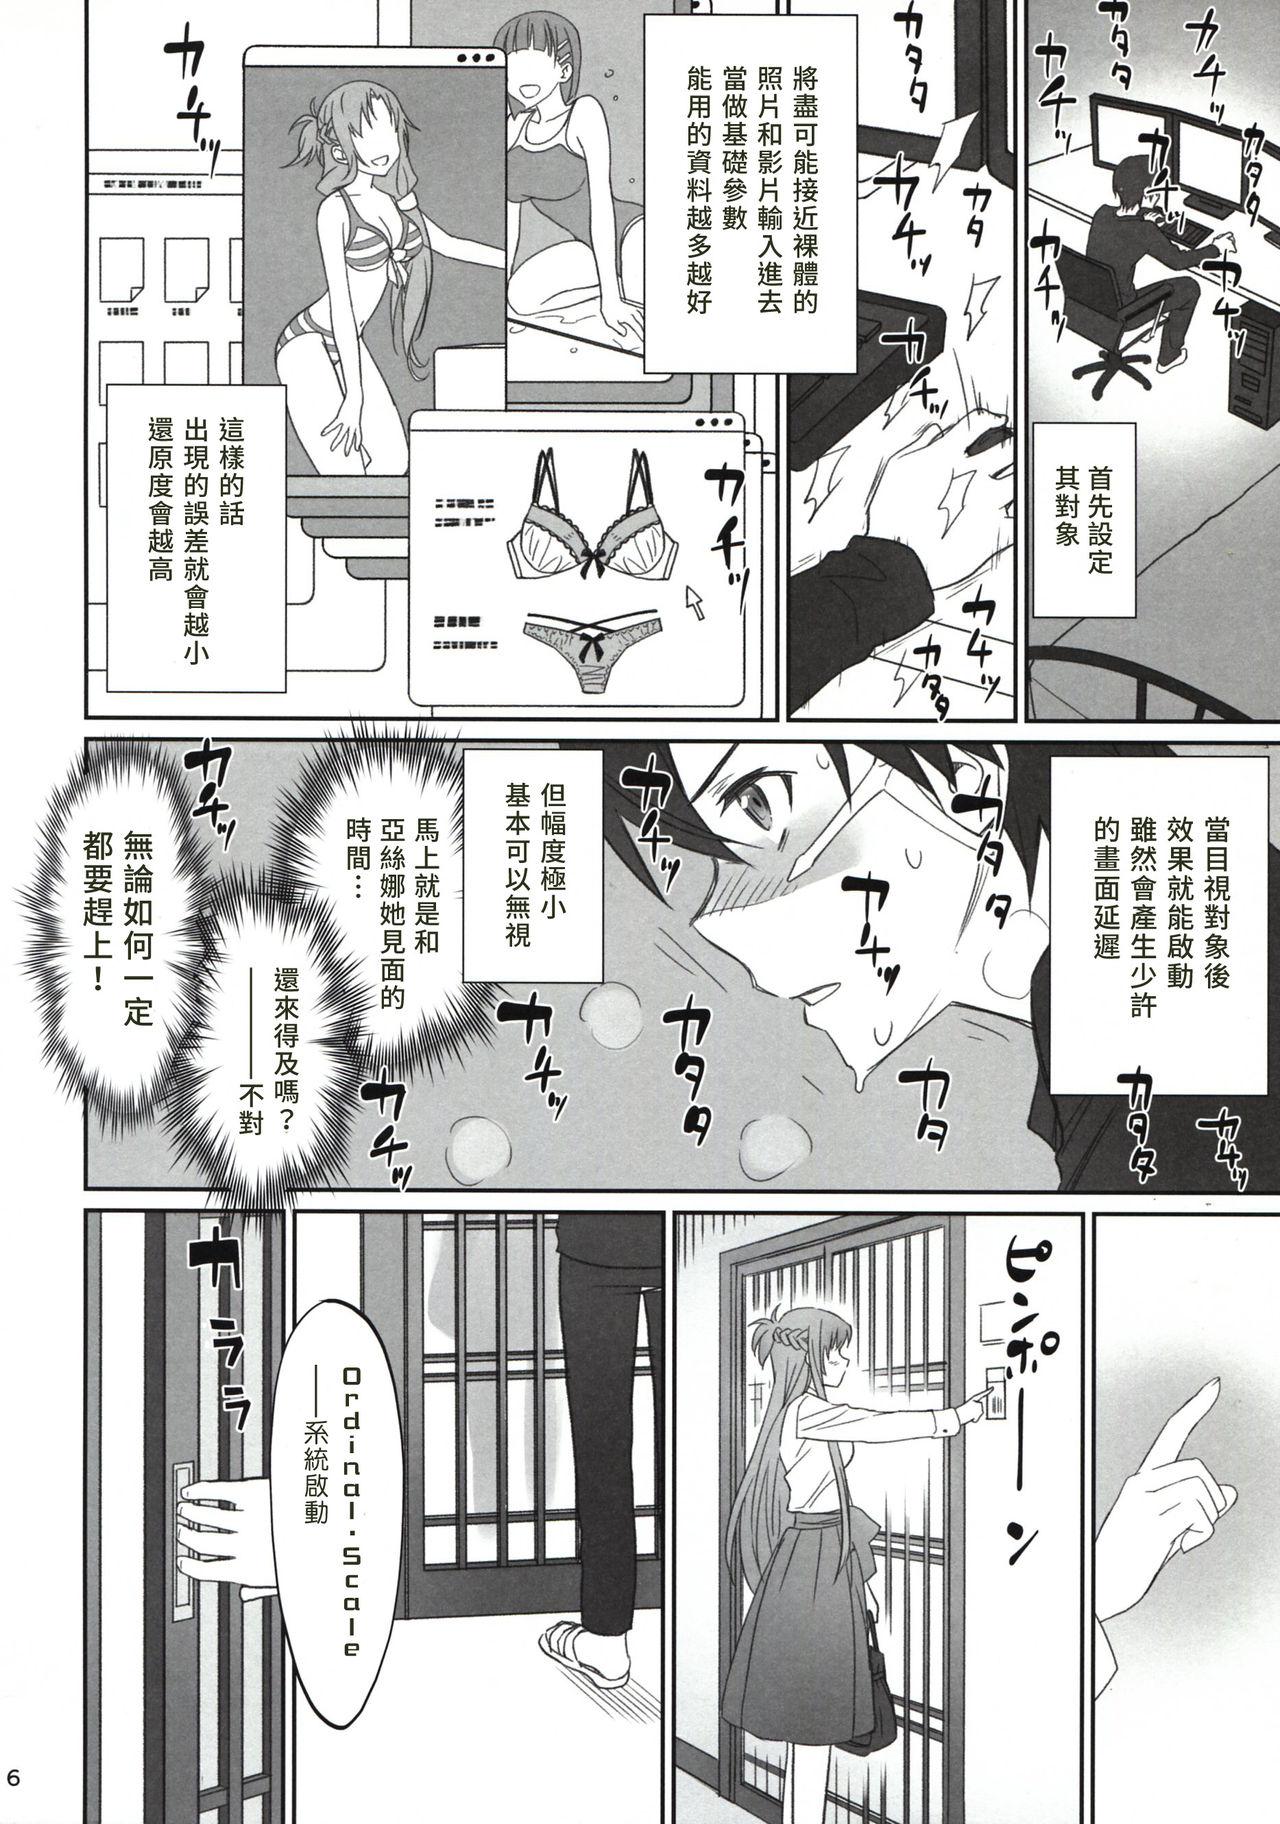 Defloration Voyeuristic Disorder - Sword art online Pussy Play - Page 6